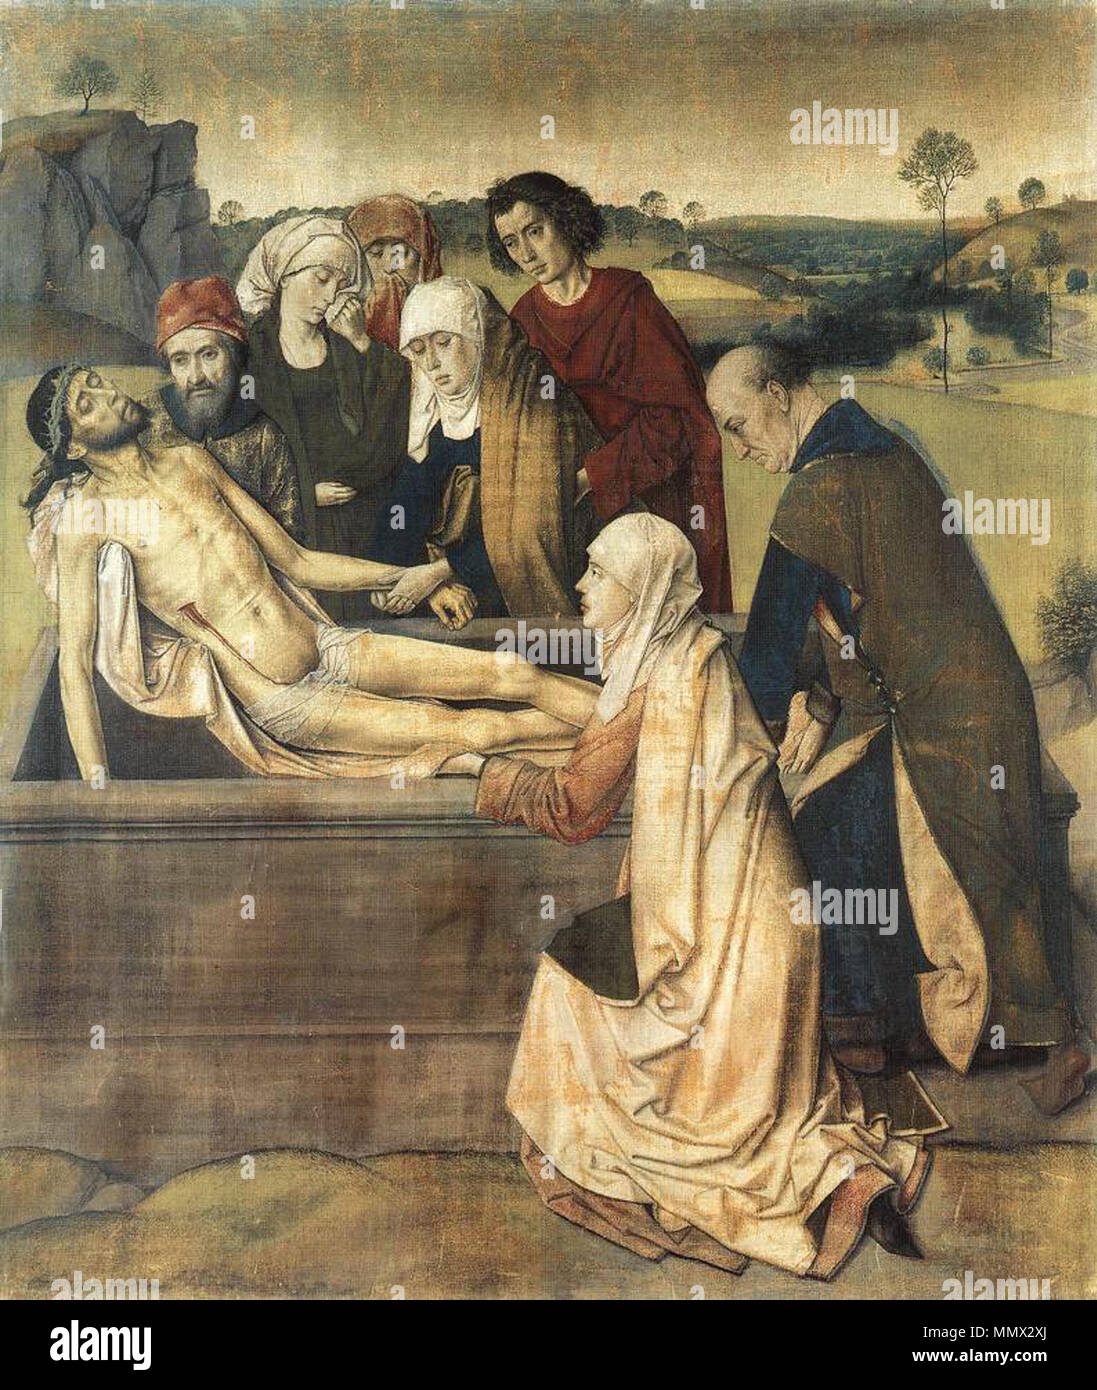 The Entombment. circa 1450. Dieric Bouts - The Entombment - WGA02961 Stock Photo